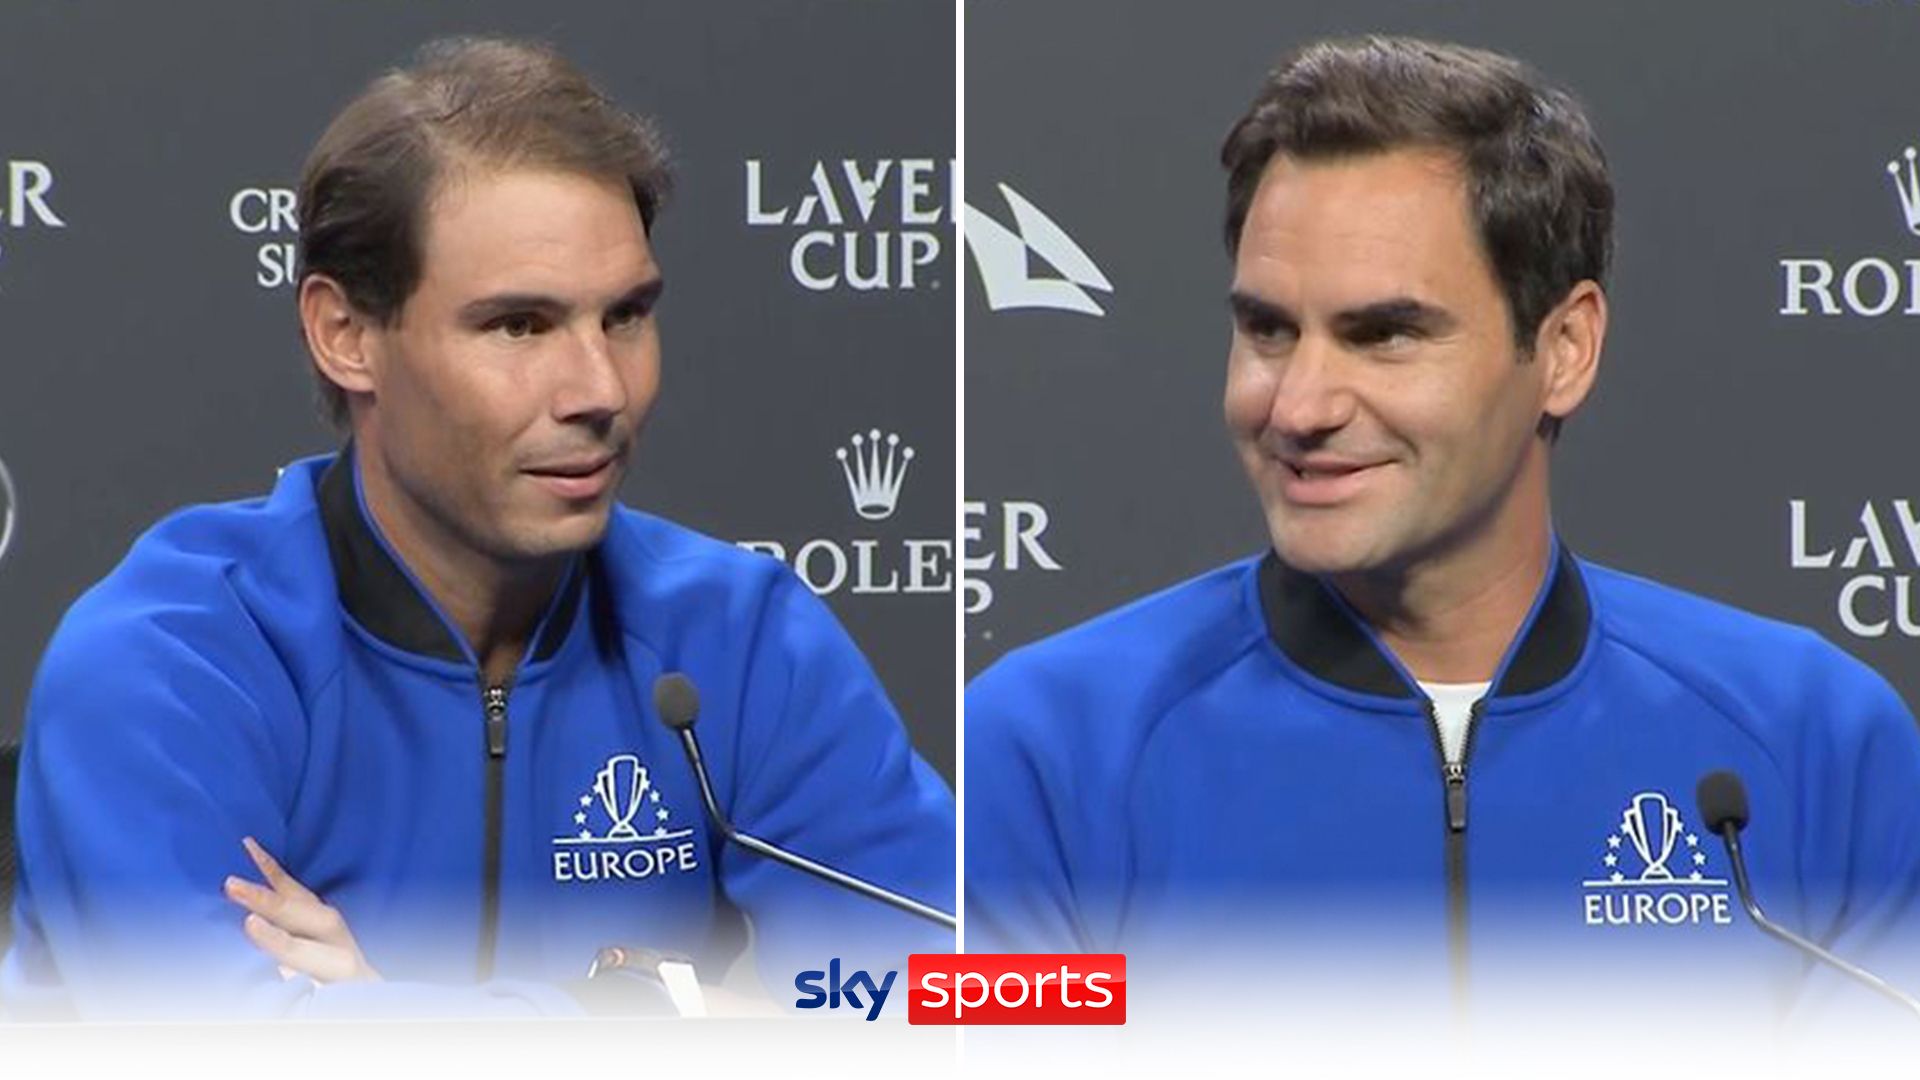 Federer: So special playing with Rafa | Nadal: It's been a friendly rivalry